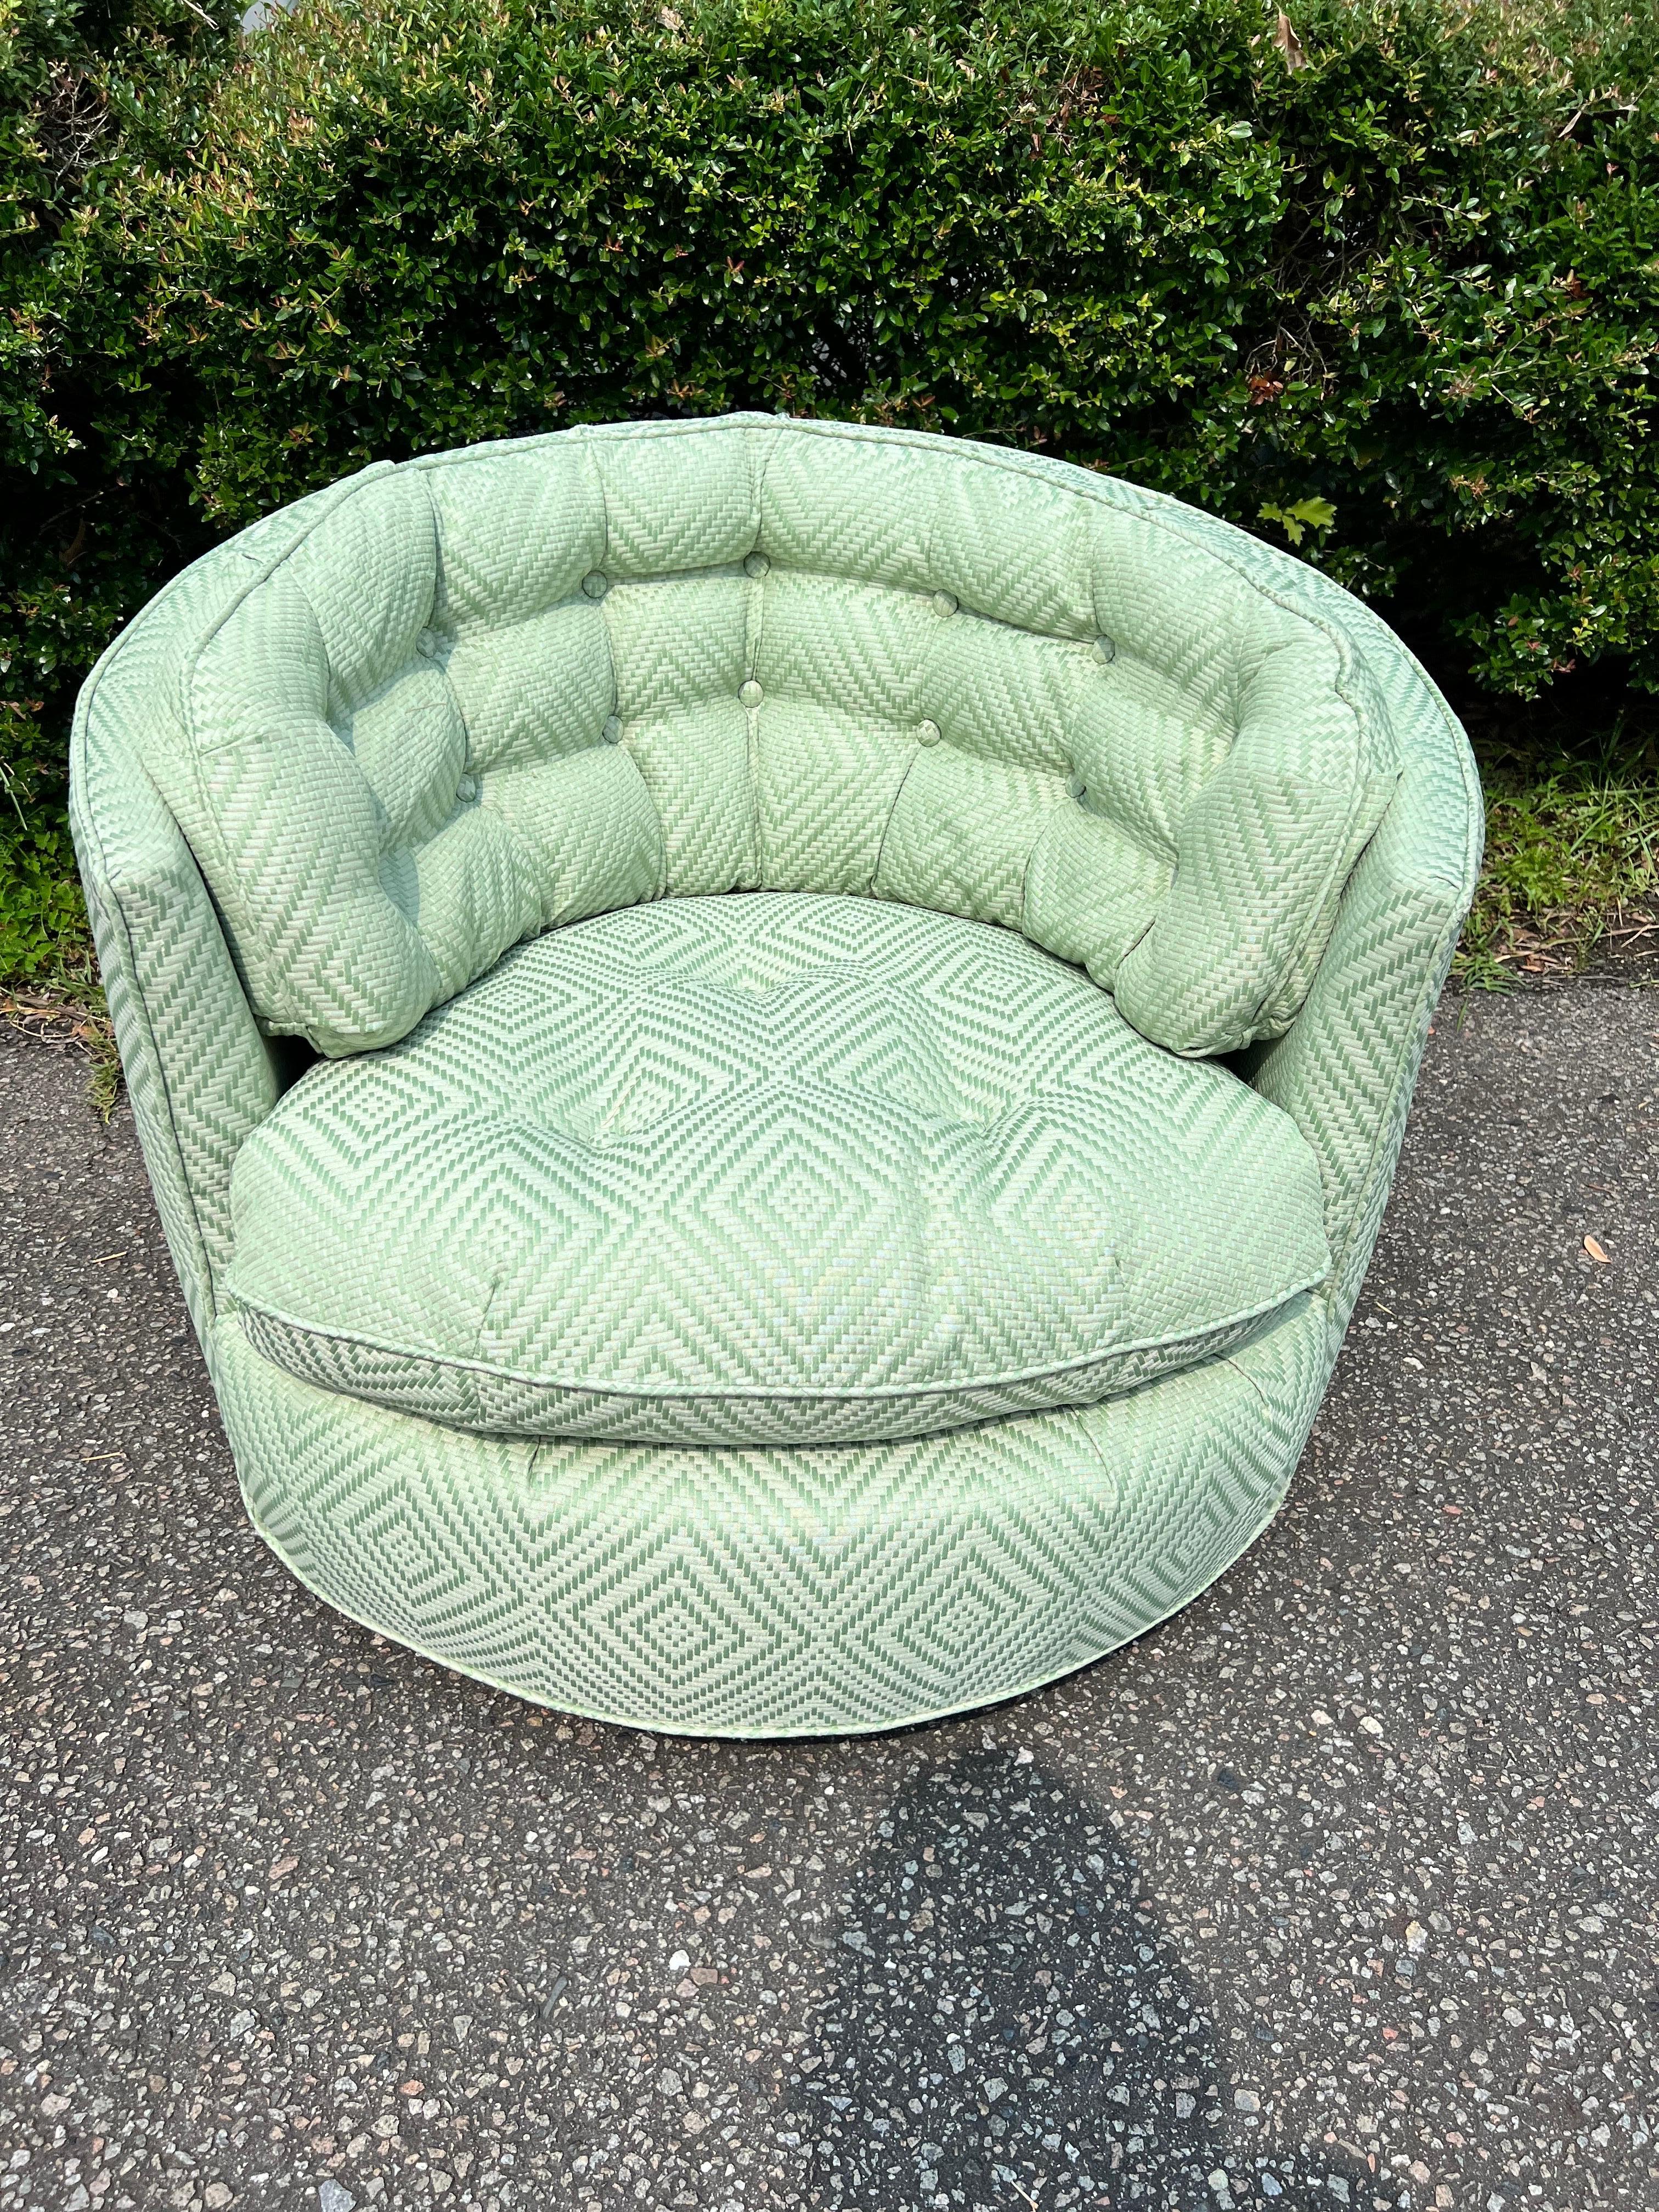 Fabulous upholstered chair by Milo Baughman for Thayer-Coggin.   Newly upholstered in a green diamond weave upholstery fabric. tufted button detail swivel chair on walnut base.  This chair has been refinished from top to bottom.   And it is so dang